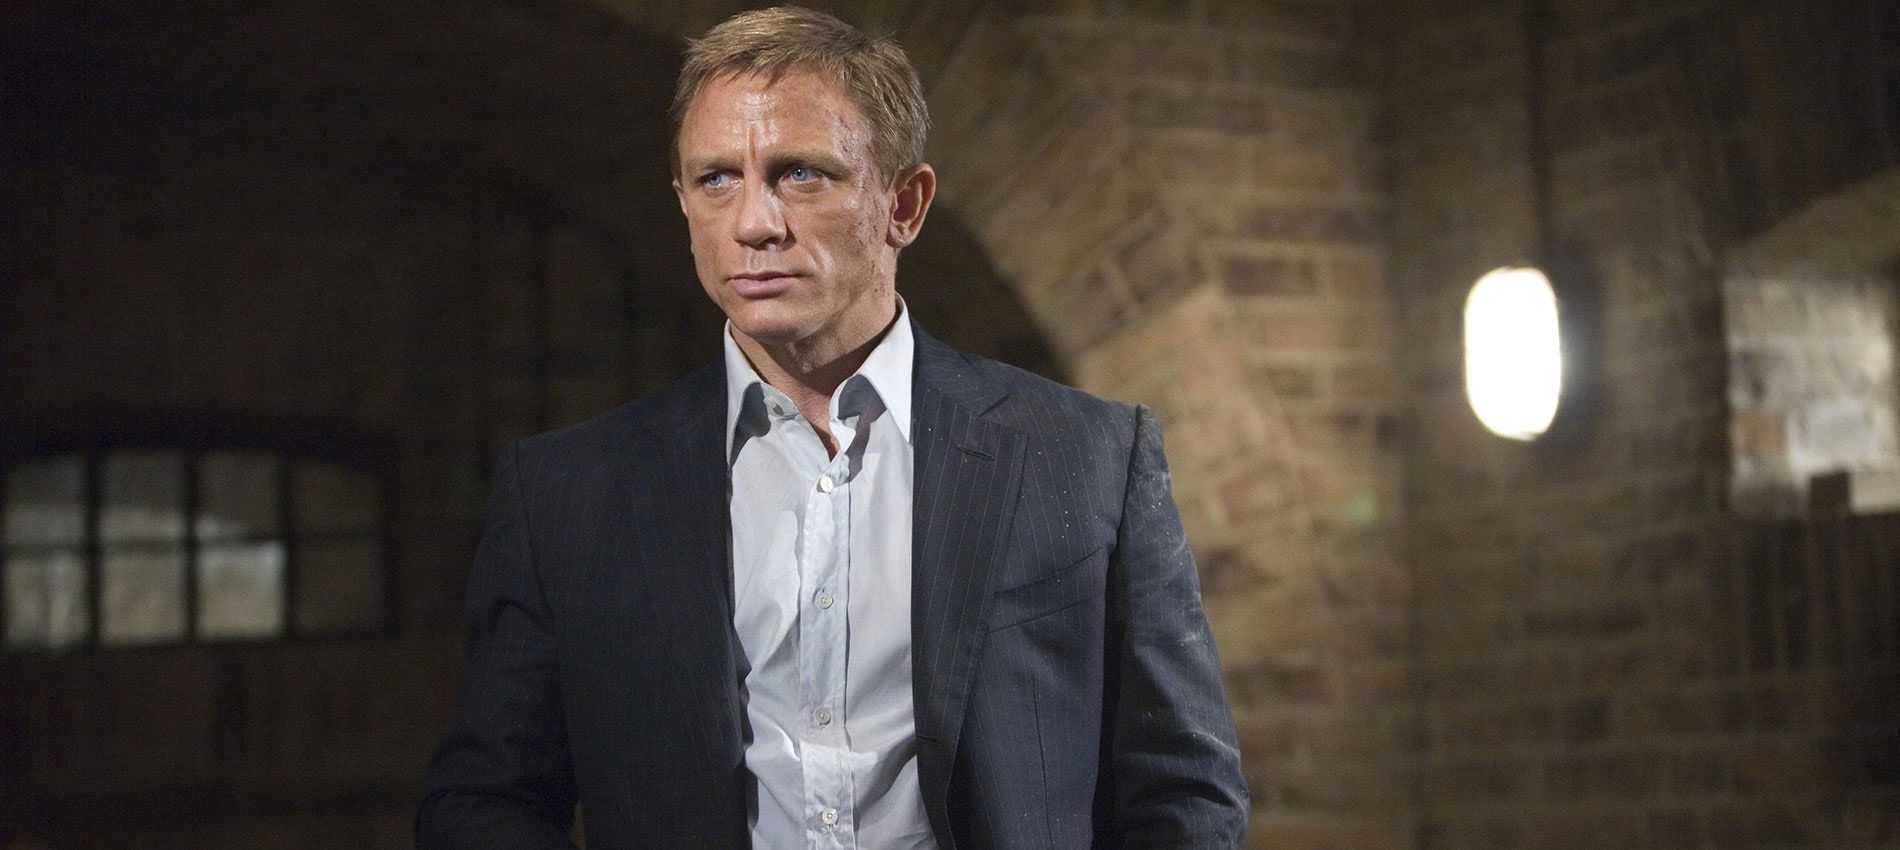 Where To Watch Daniel Craig's Bond Movies Online Before No Time To Die